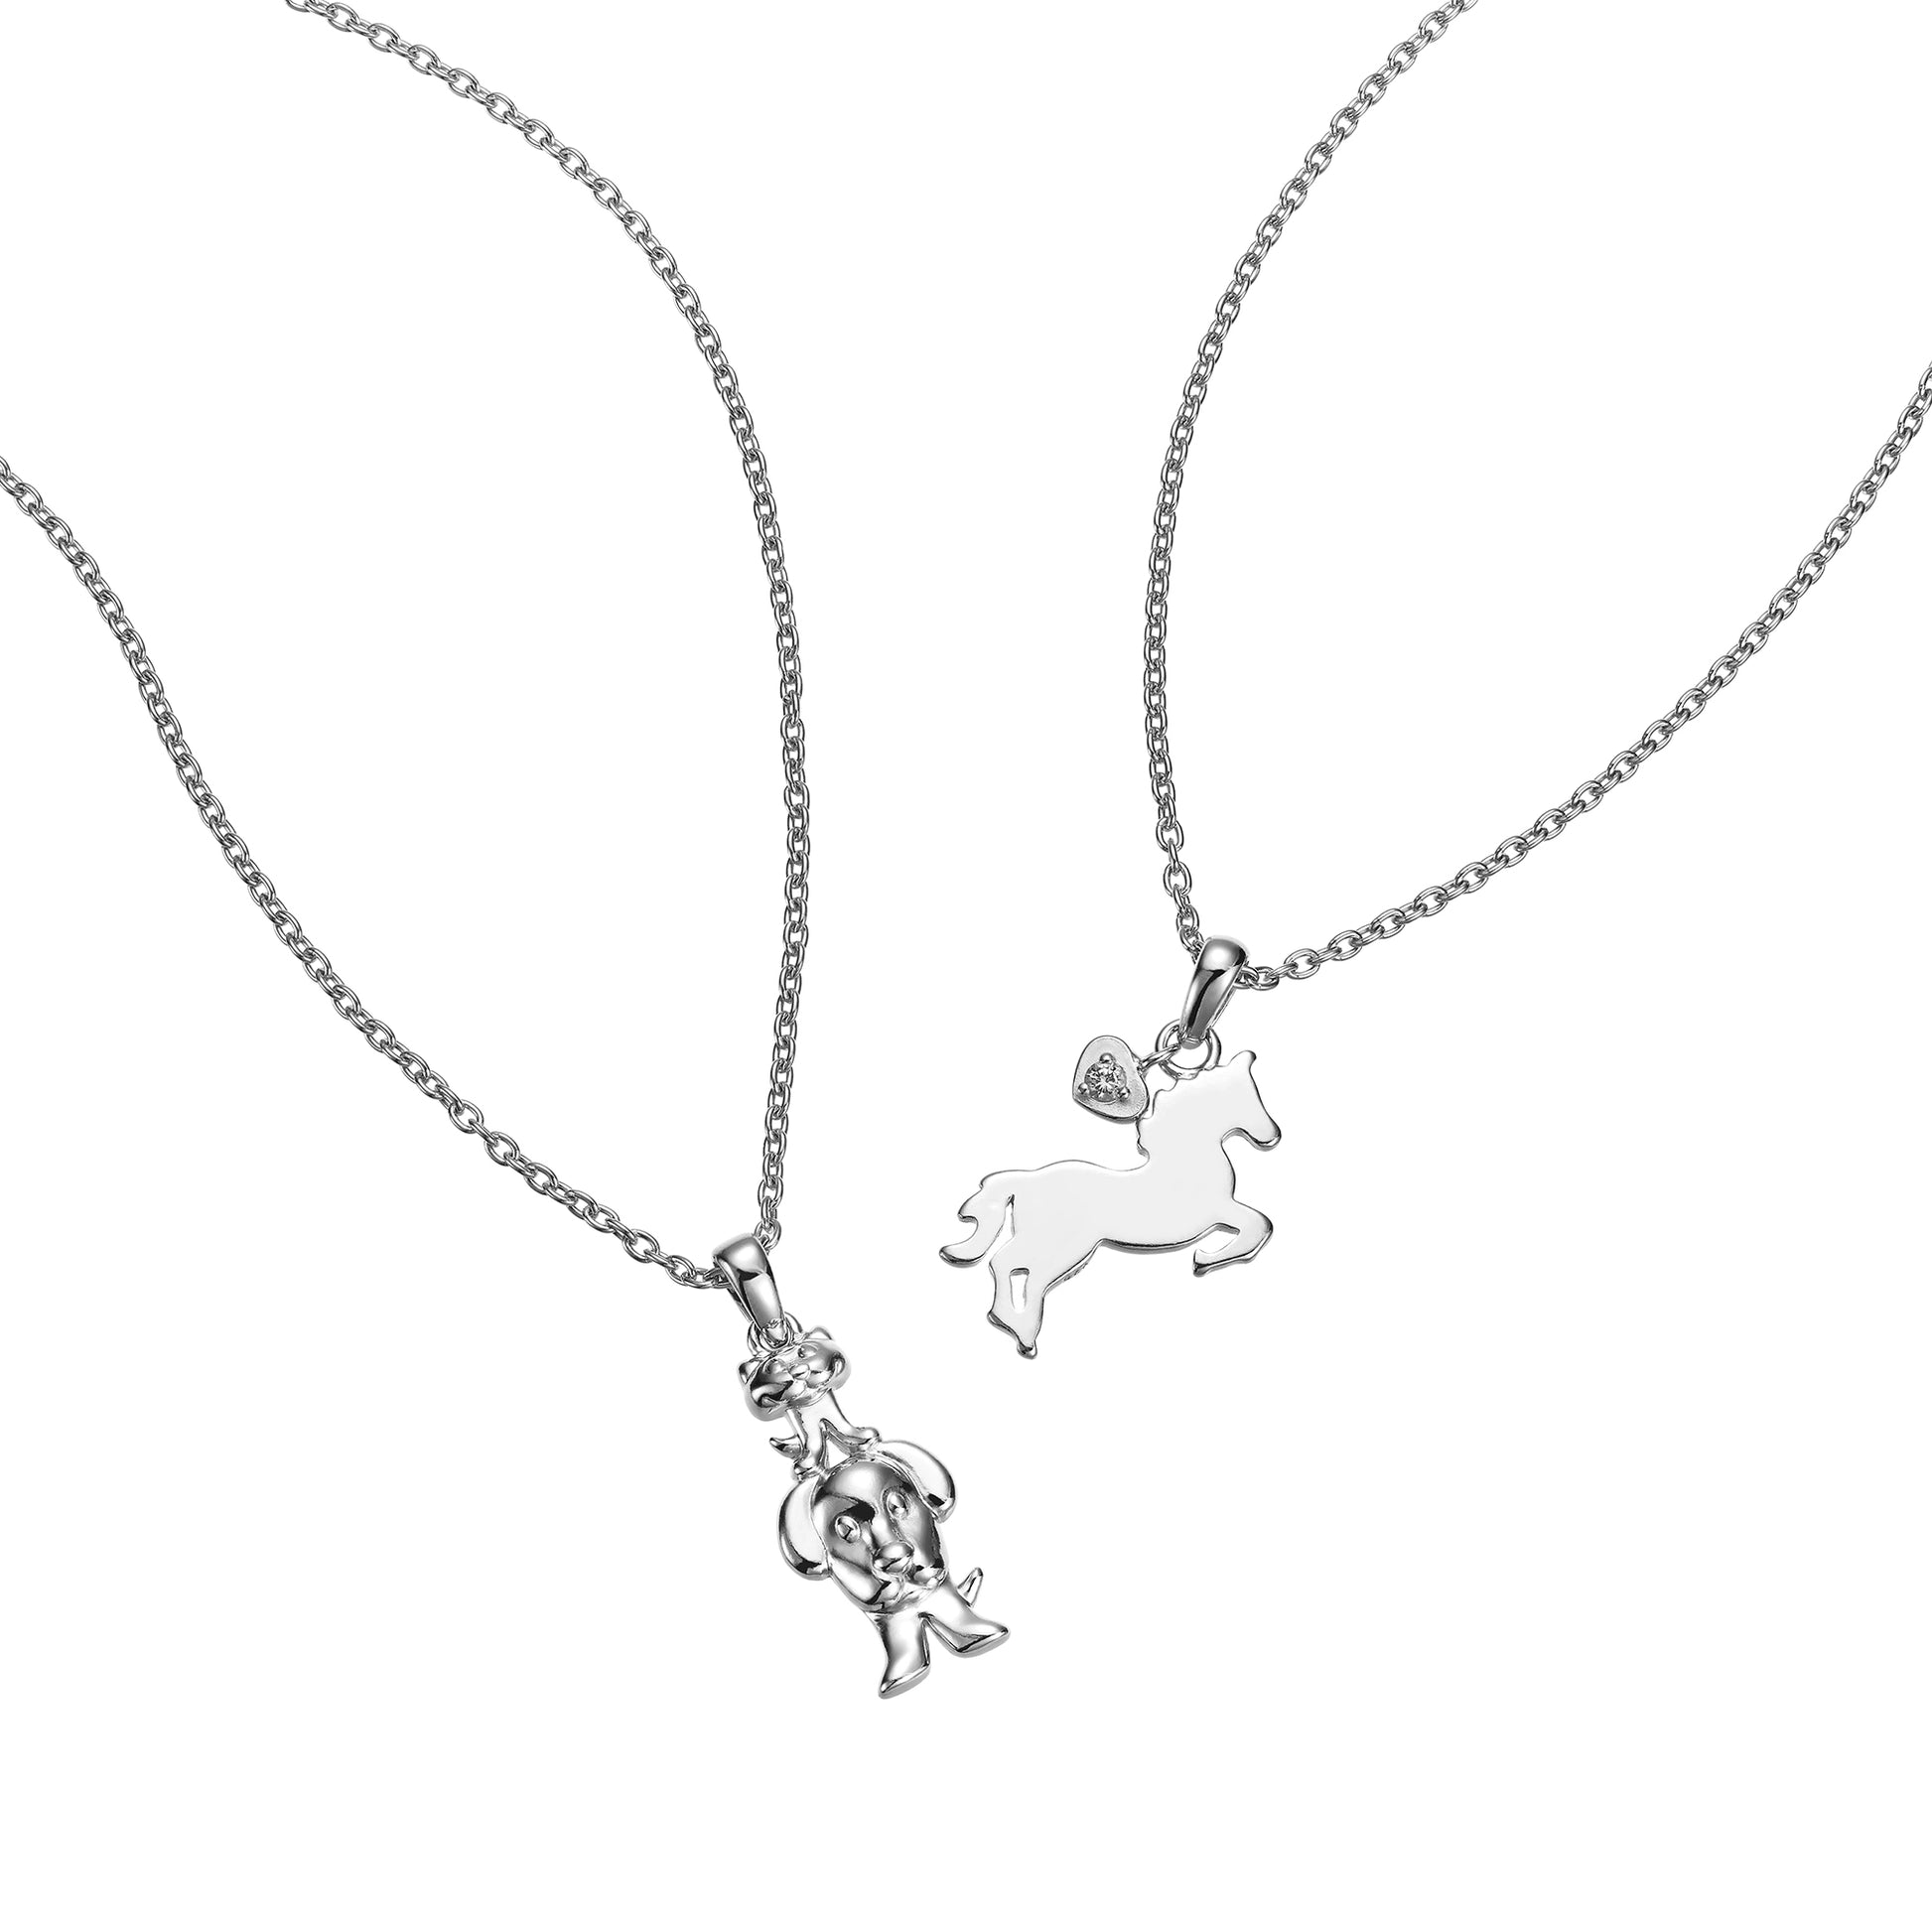 Children's  Sterling Silver Cute Cat and Dog and Horse Pendants on Extendable Chain Necklaces